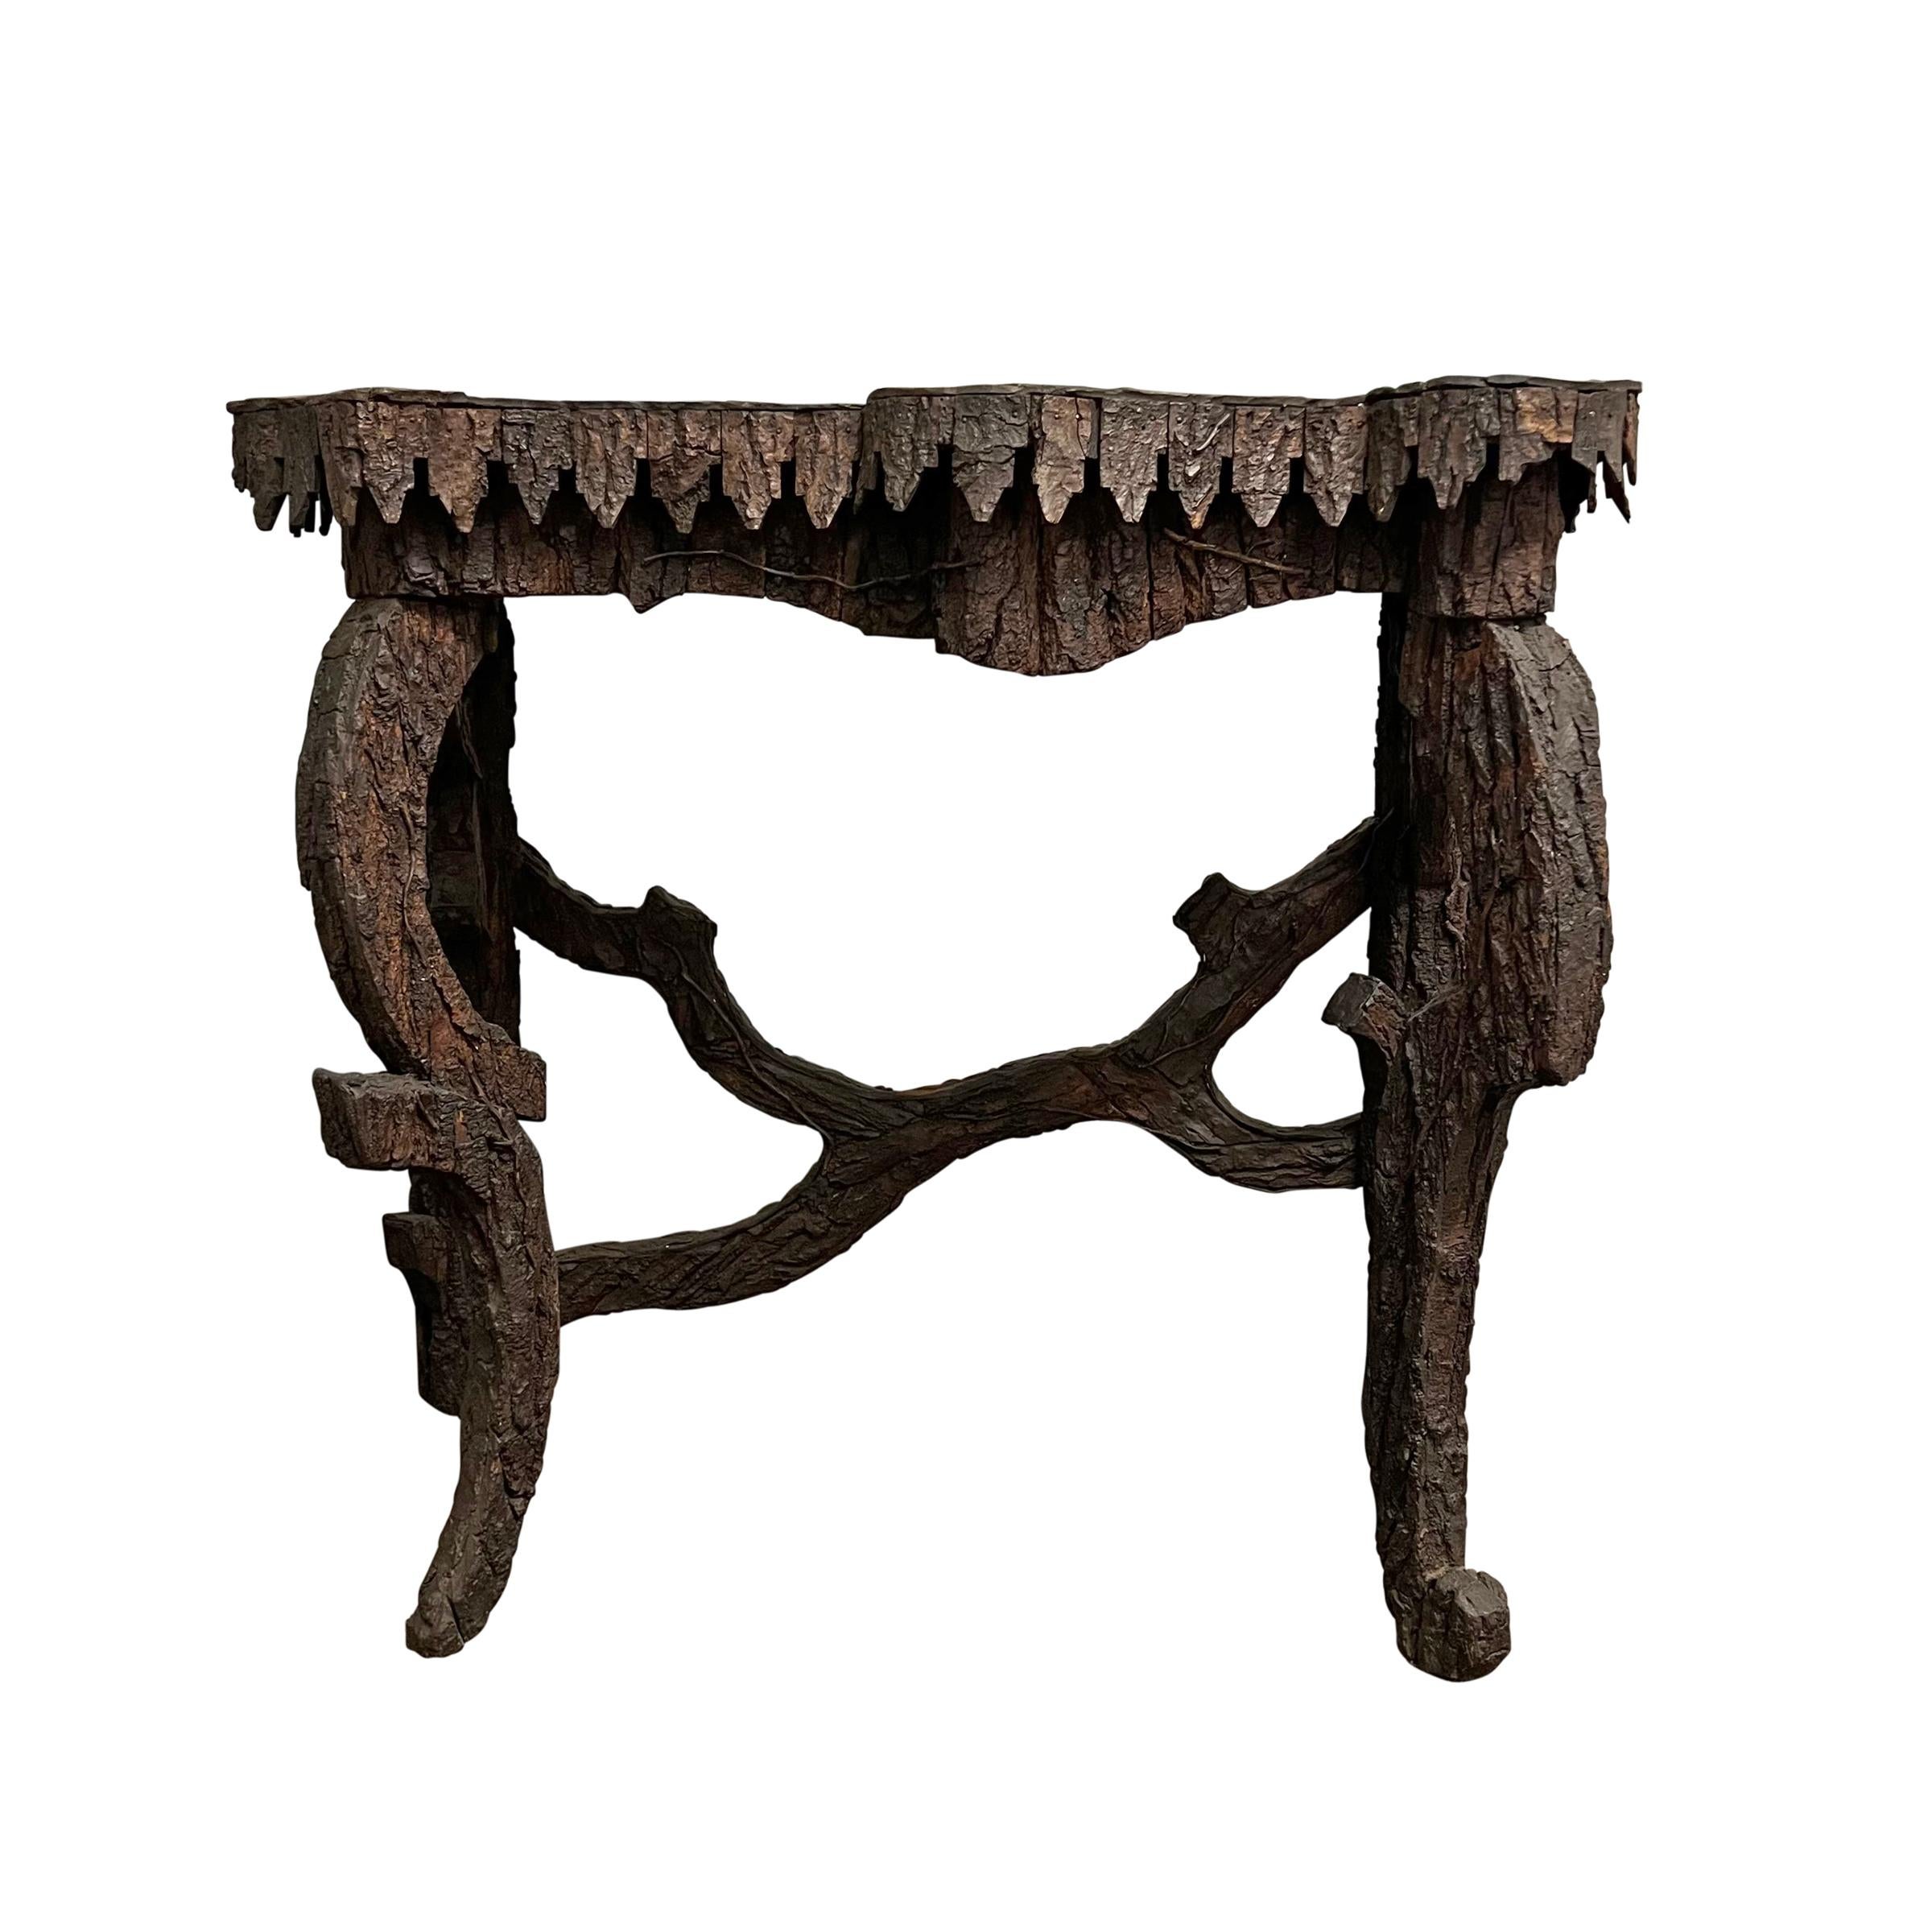 Rustic Early 20th Century Italian Bark Console Table from a Tyrolean Chalet